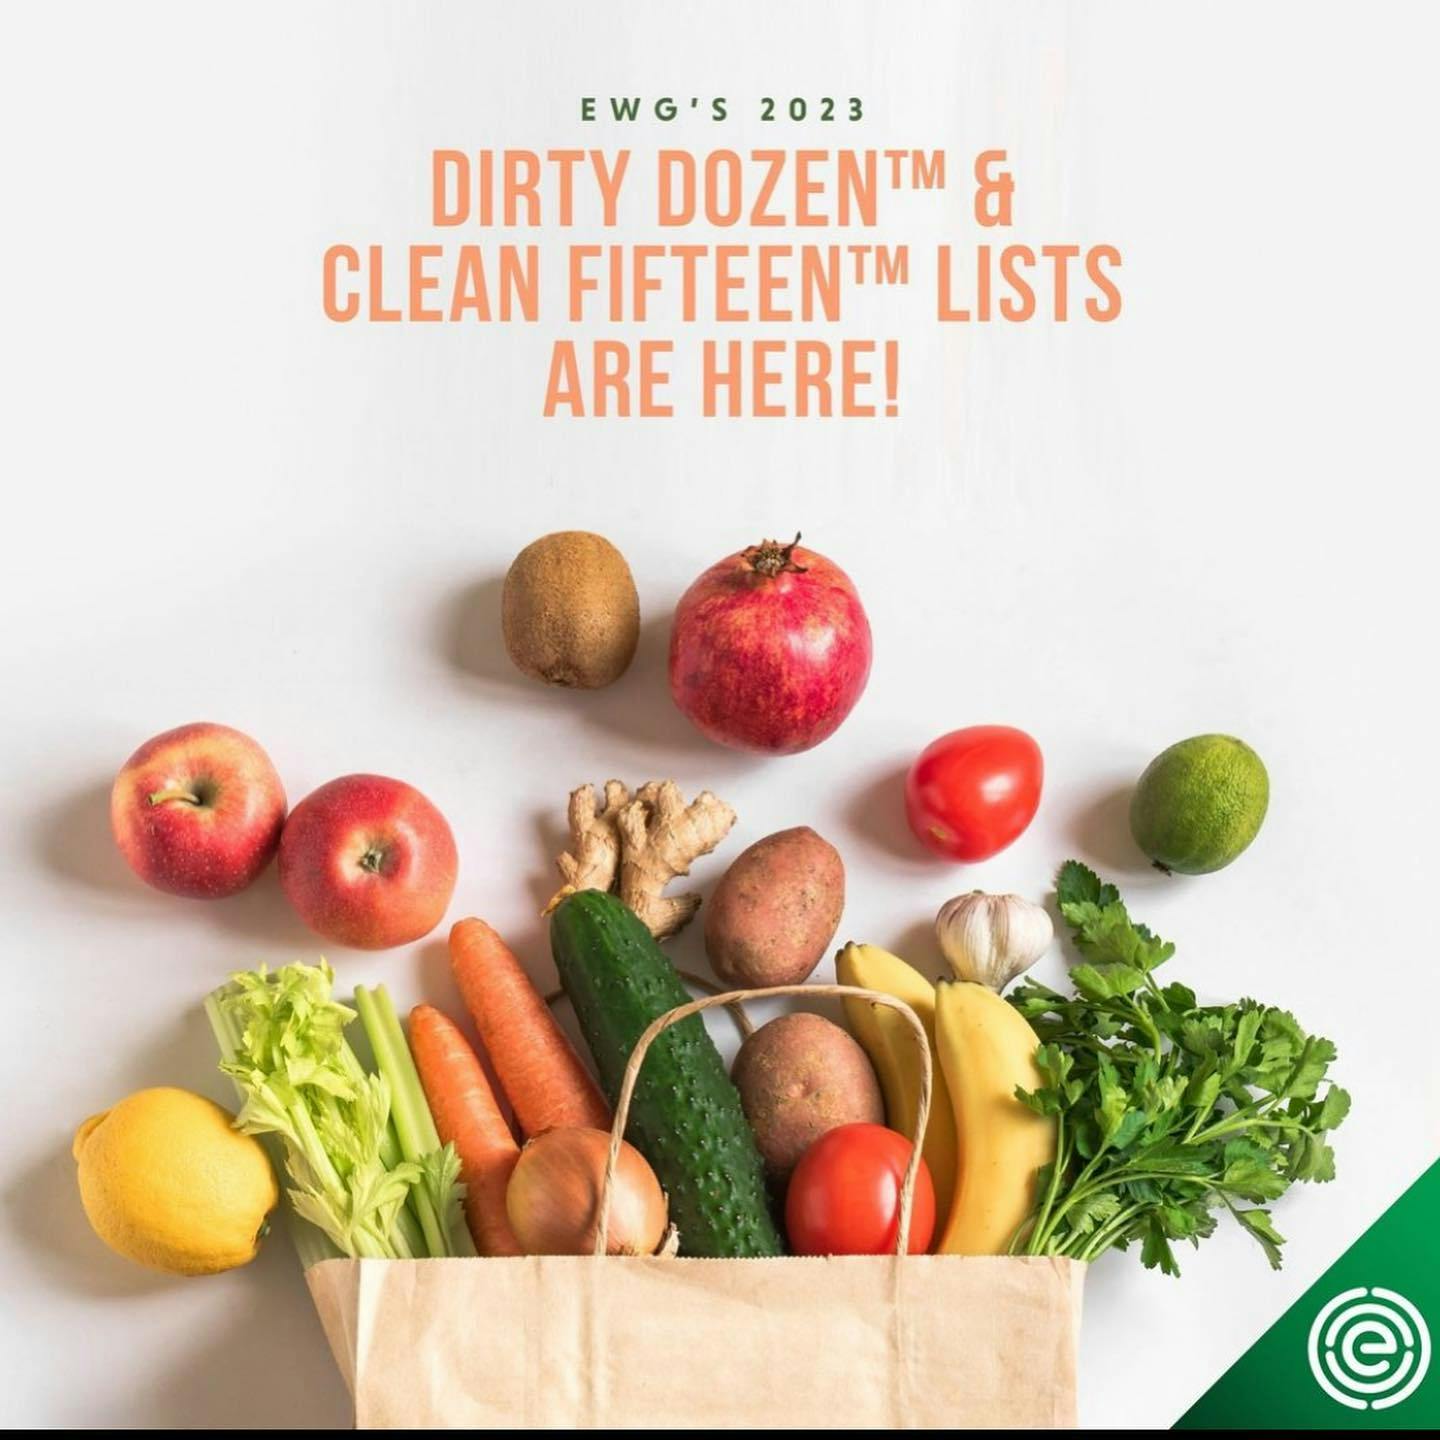 The 2023 EWG Shoppers Guide is out, revealing the most and least pesticide-contaminated conventionally grown fruits and vegetables. Did any of your favorites make the list? 😮 Read more about this year's Dirty Dozen™ and Clean 15™ lists >> link in our bio!

Repost from @environmentalworkinggroup 

•
•
•
#ewg #environmentalworkinggroup #dirtydozen #cleanfifteen #clean15 #pesticides #pesticide #healthy #wellness #health #USDA